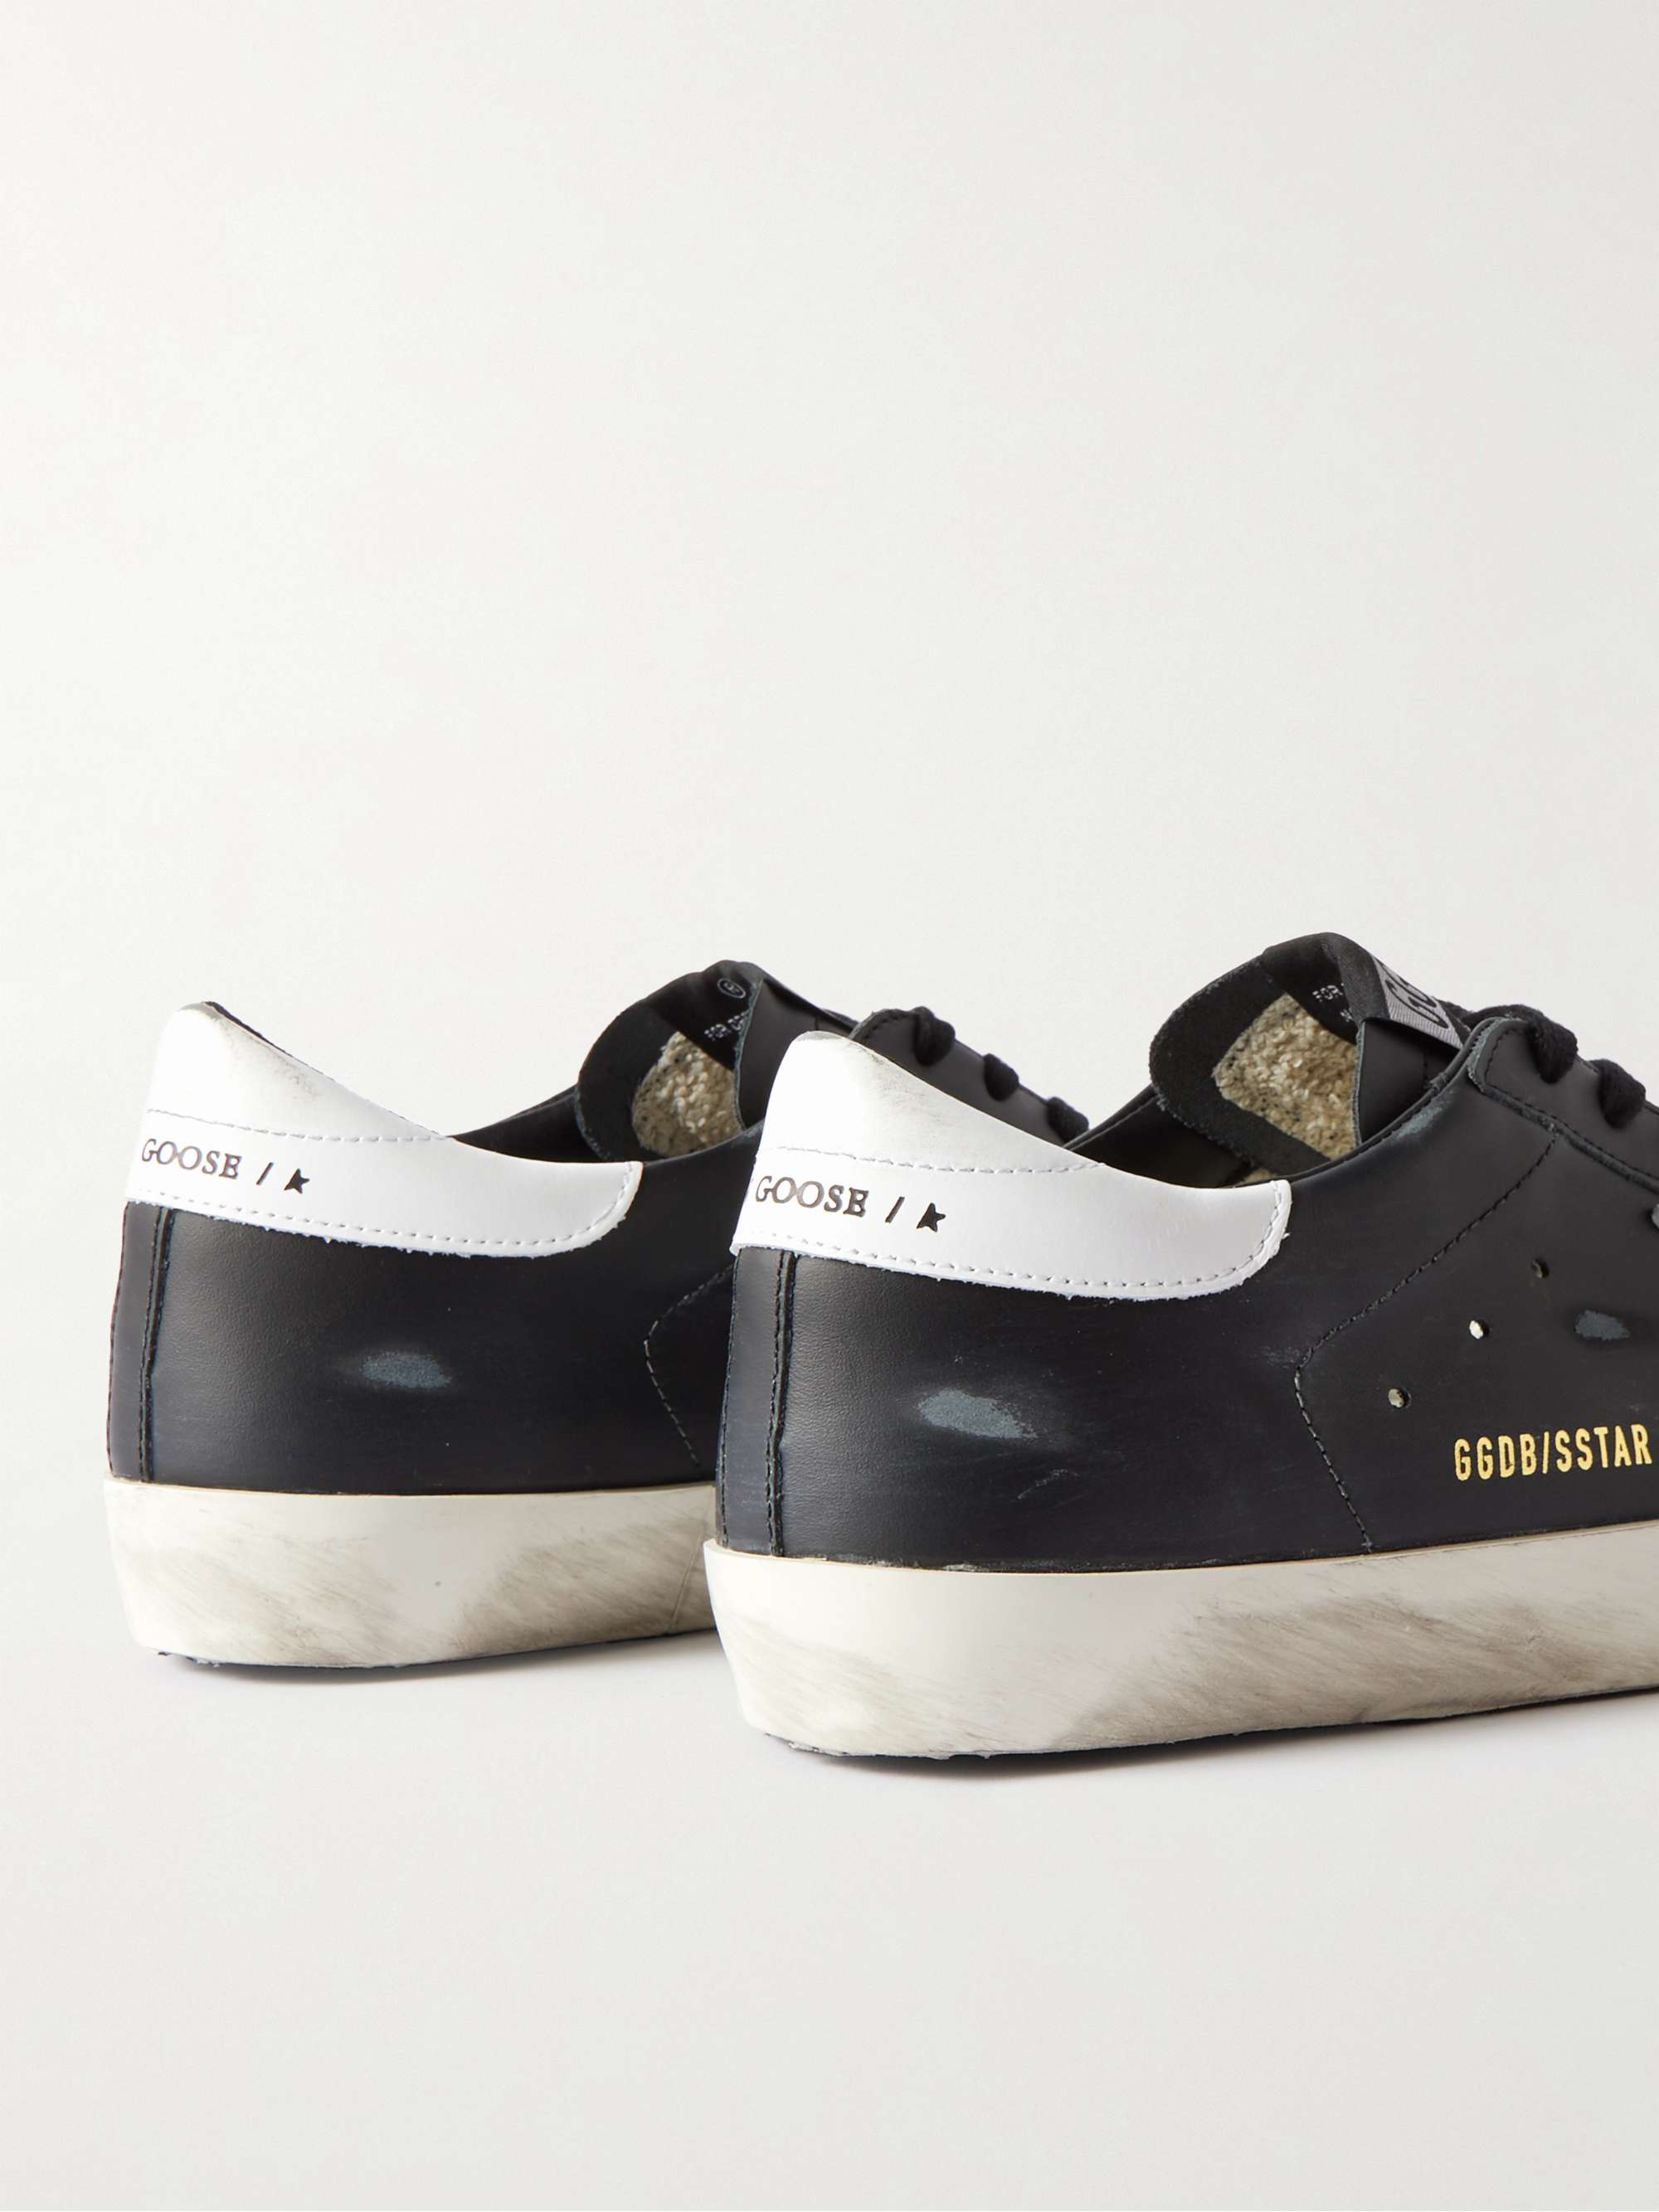 GOLDEN GOOSE Superstar Distressed Leather Sneakers